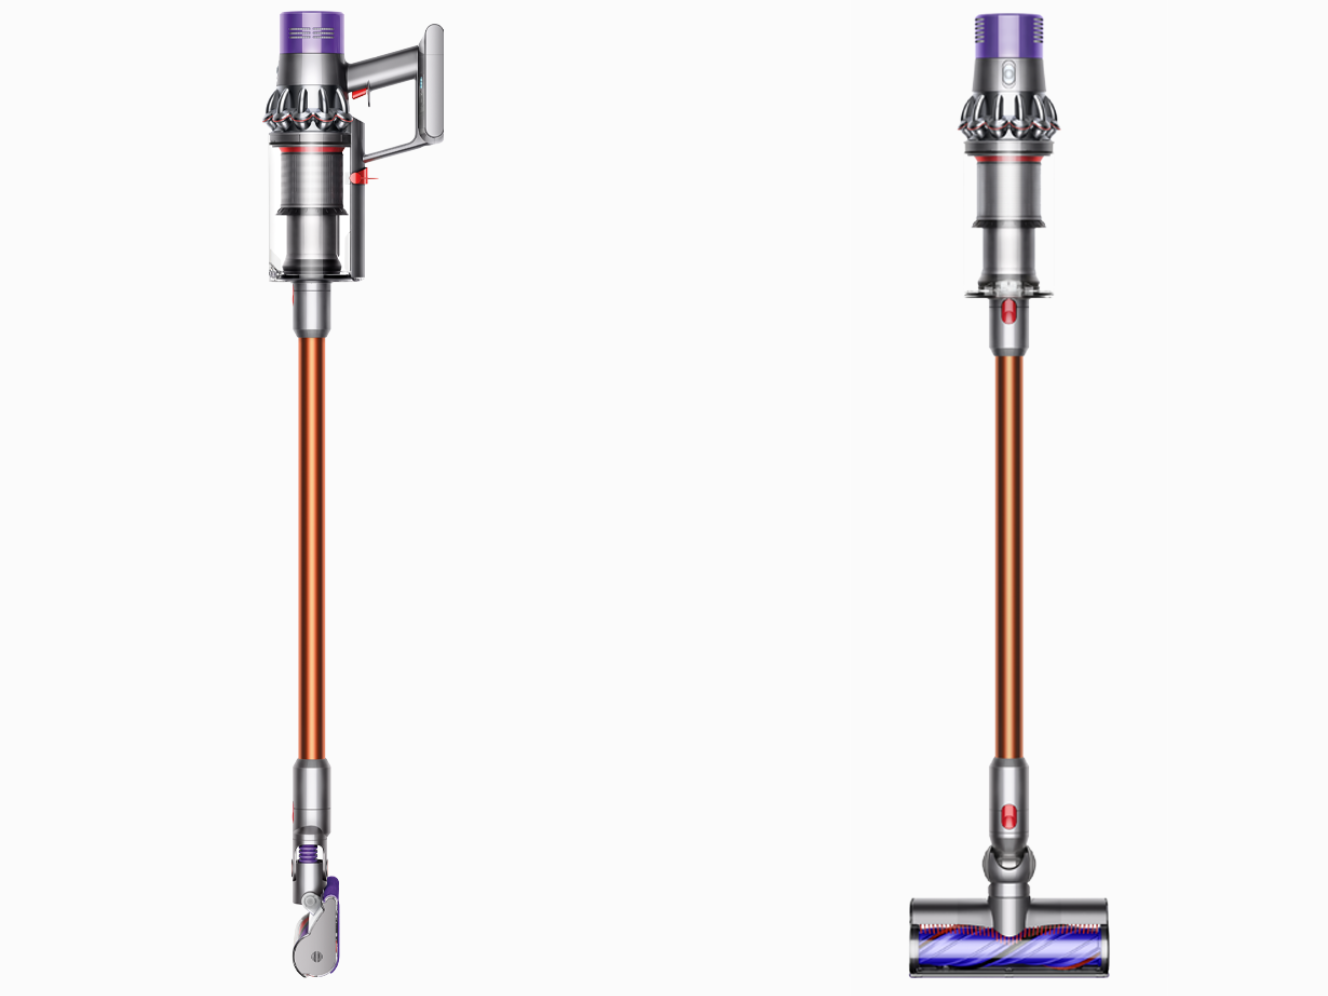 microscope plans lung Dyson Cyclone V10 Absolute (Nickel/Copper) | Dyson Cyclone V10 Absolute  (Nickel/Copper)